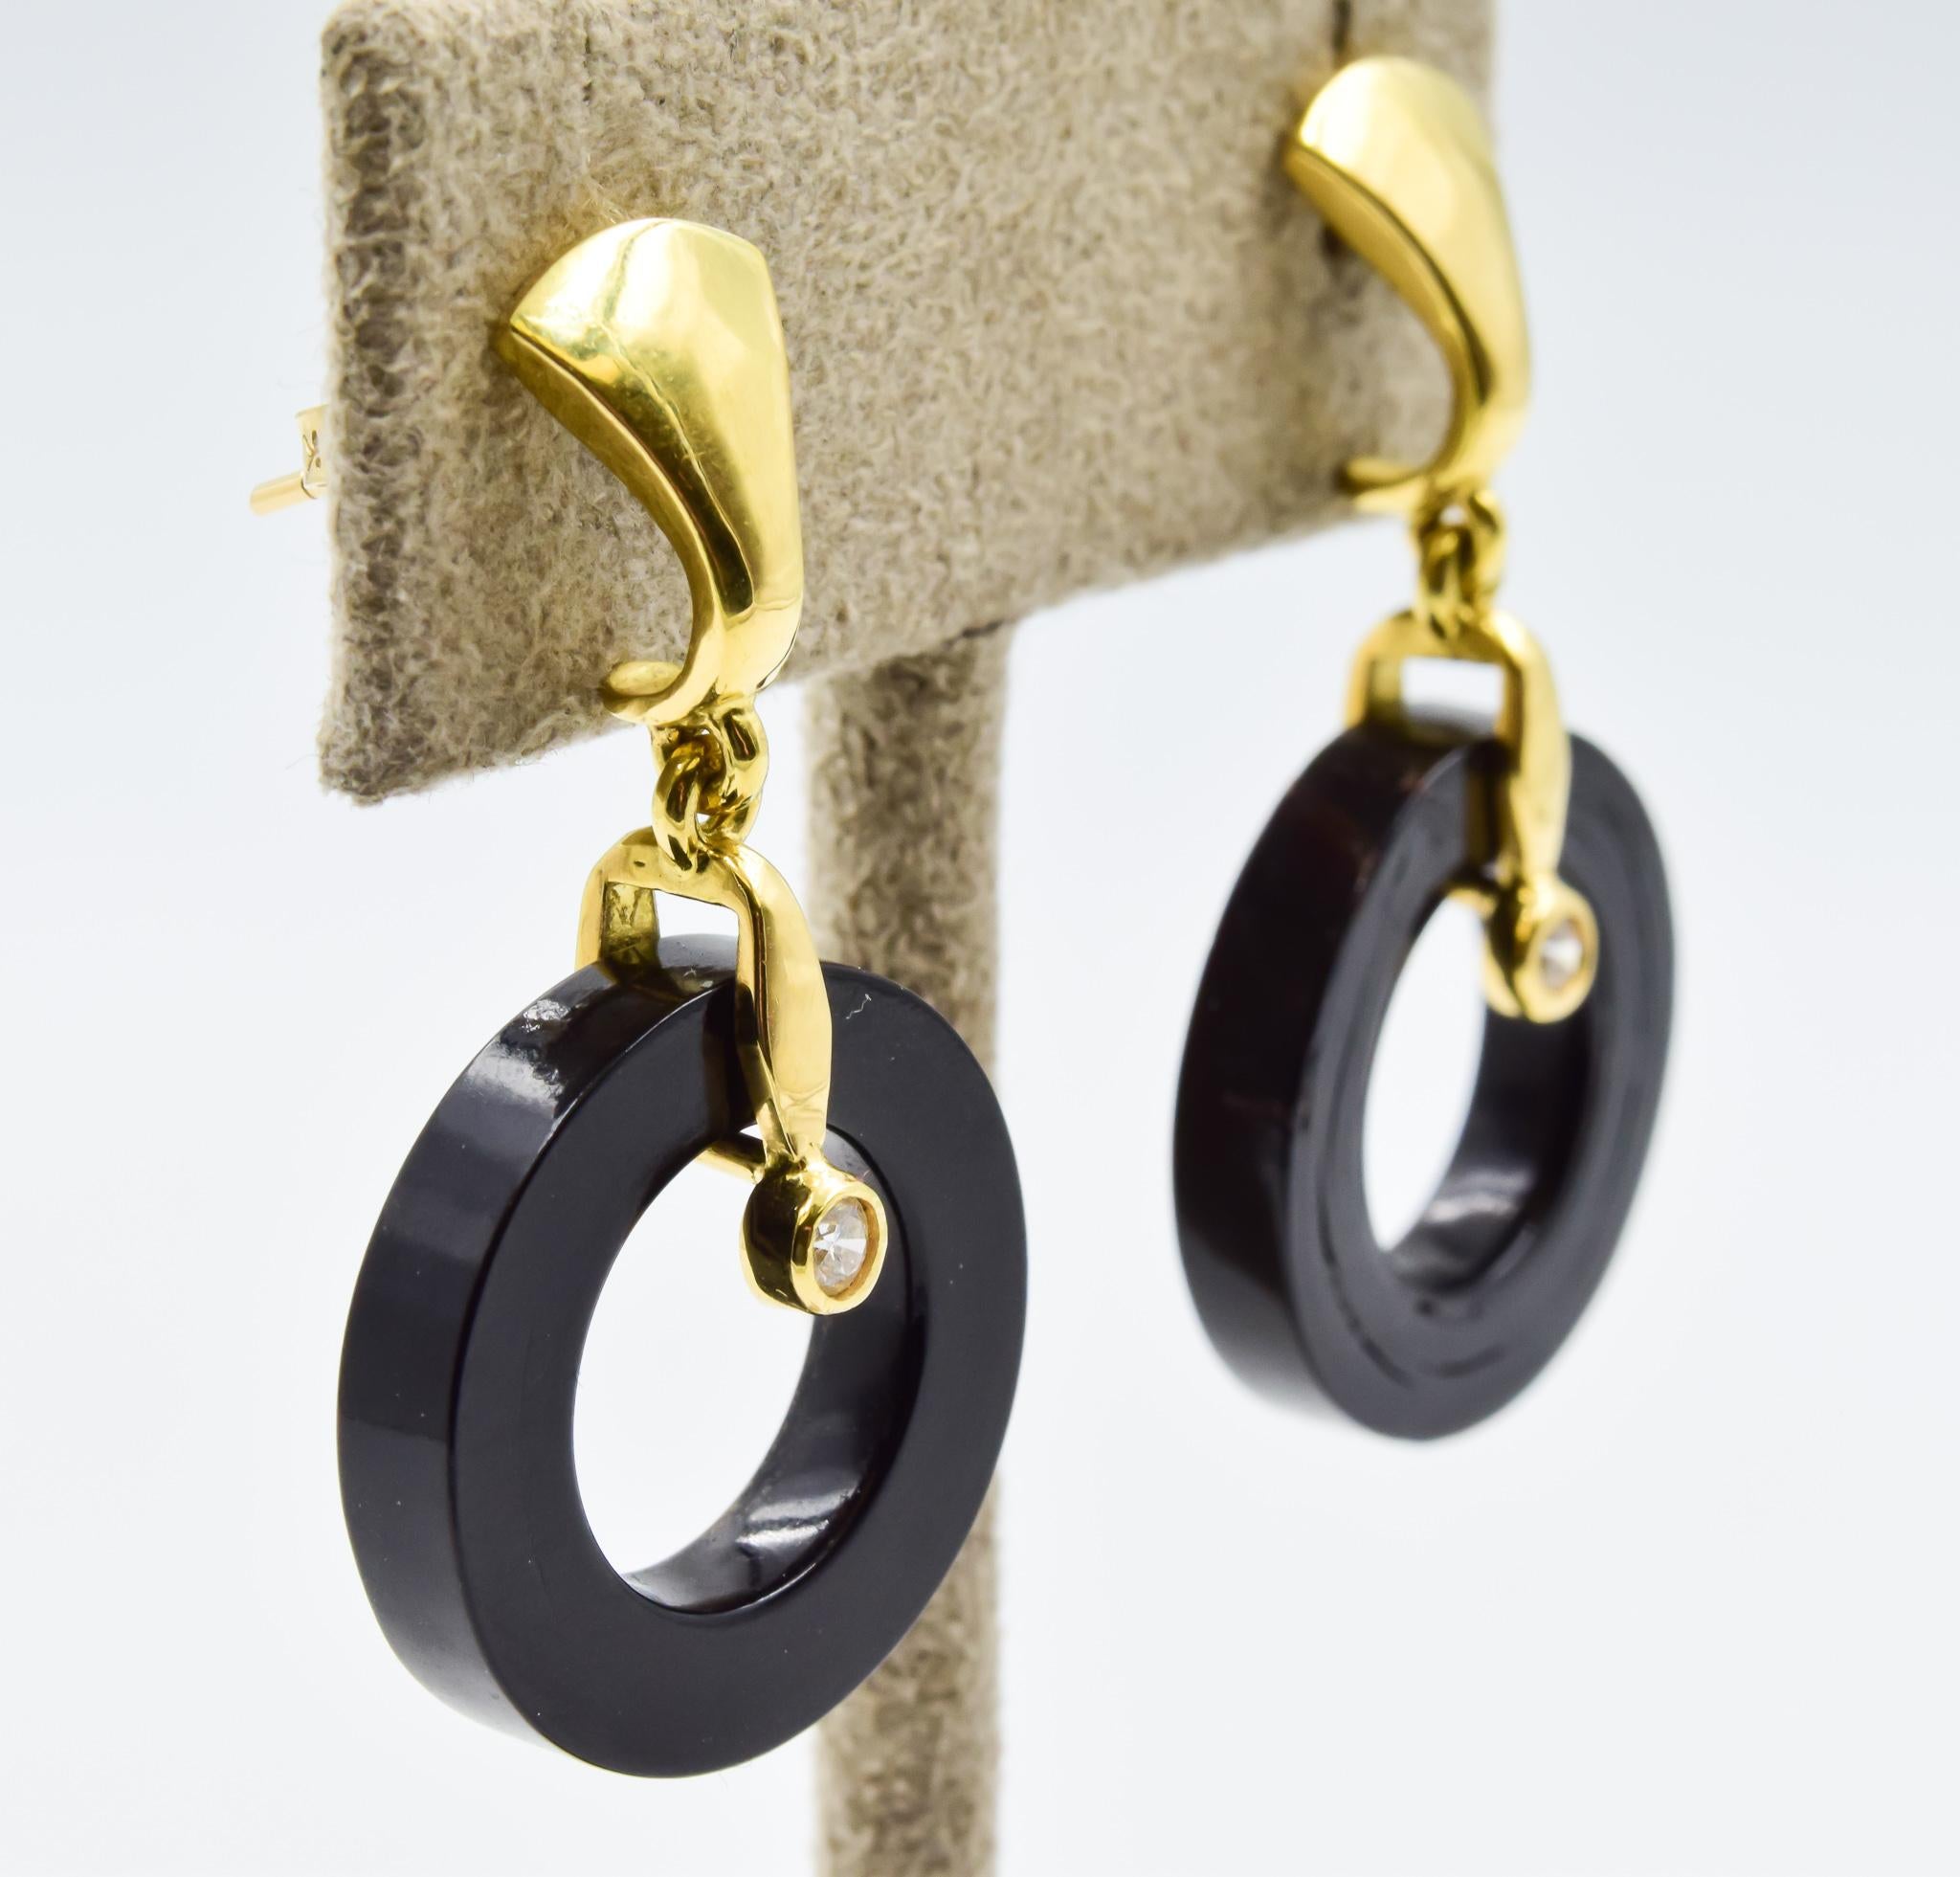 These earrings were recently traded in to our store and are in excellent condition! They feature the signature black coral that is used in the Bernard Passman pieces. These are hung on 18 carat gold with a diamond accent feature. The texture of the